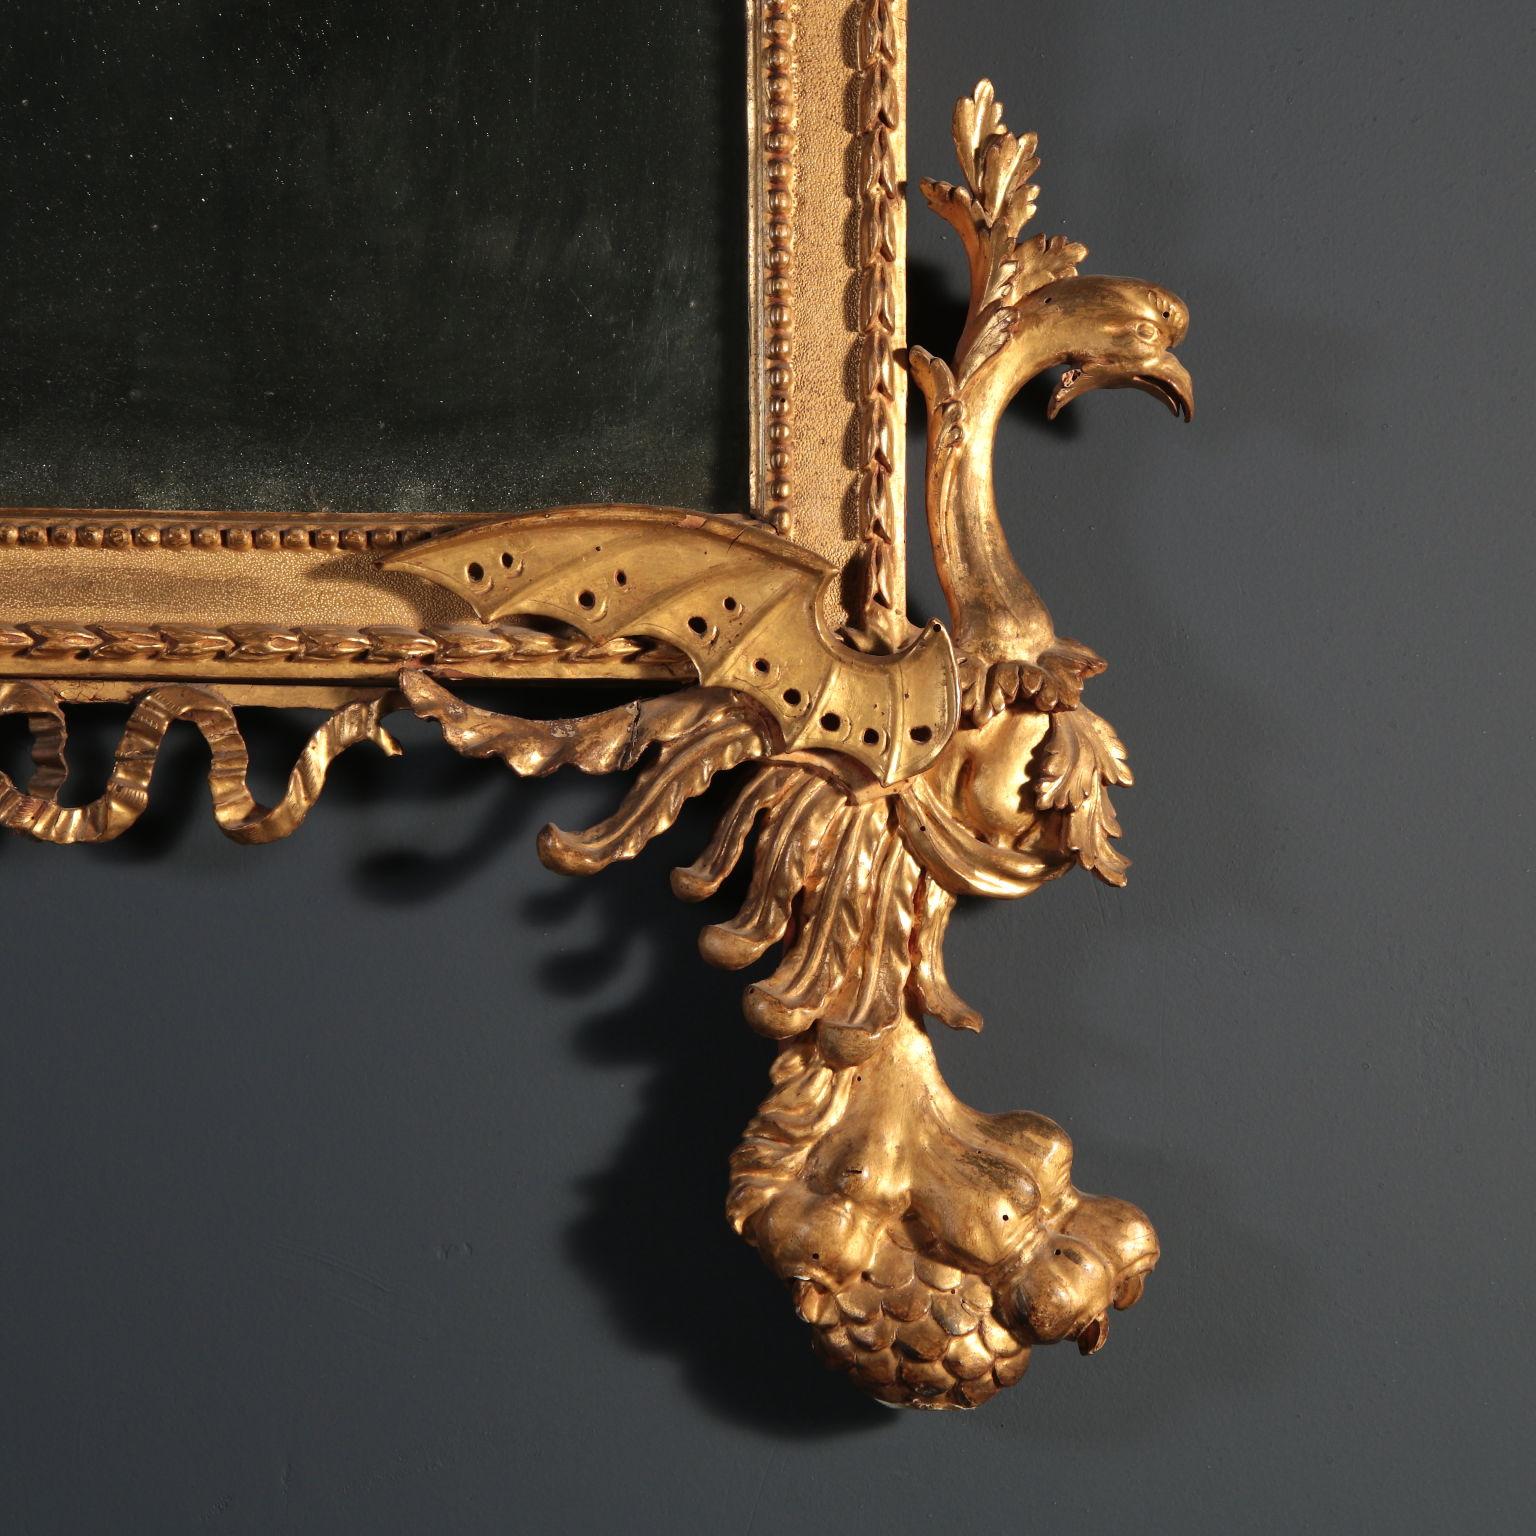 Gilded linden wall mirror richly and finely carved. The rectangular frame is carved and burin made with gold finishing; on the architectual fronton cymatium are leaning two chimeras with a classical taste carved flower vase in the middle; the vase